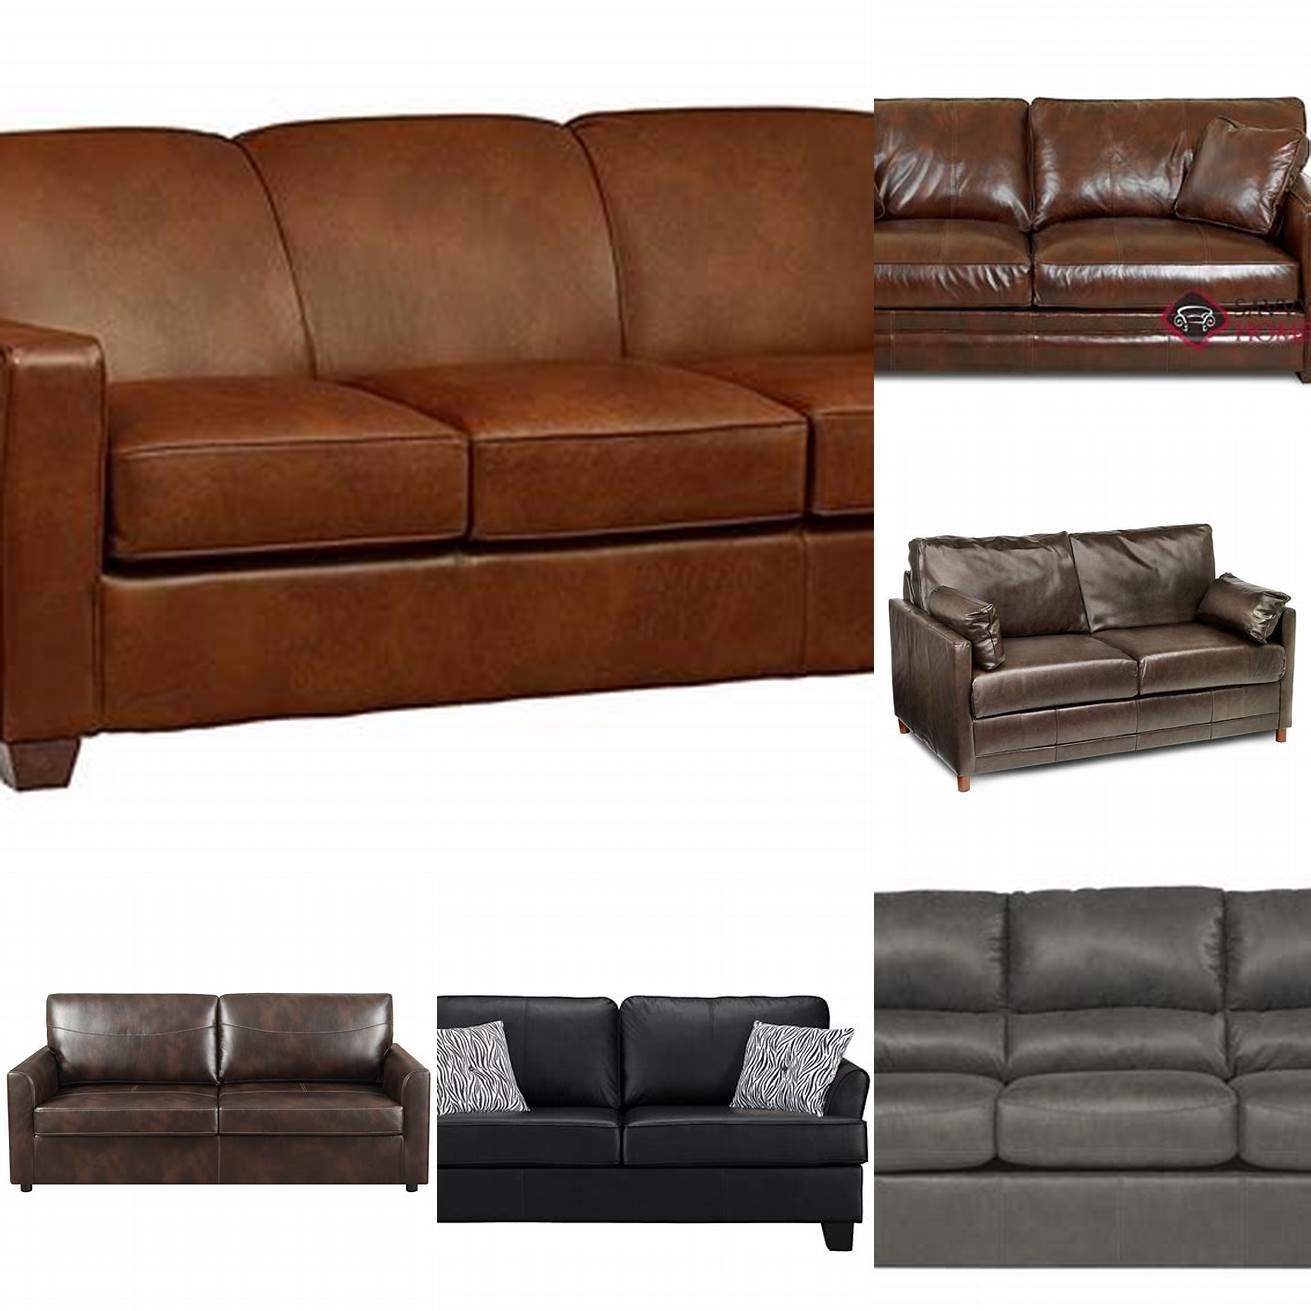 A leather Full Sleeper Sofa is a durable and stylish option